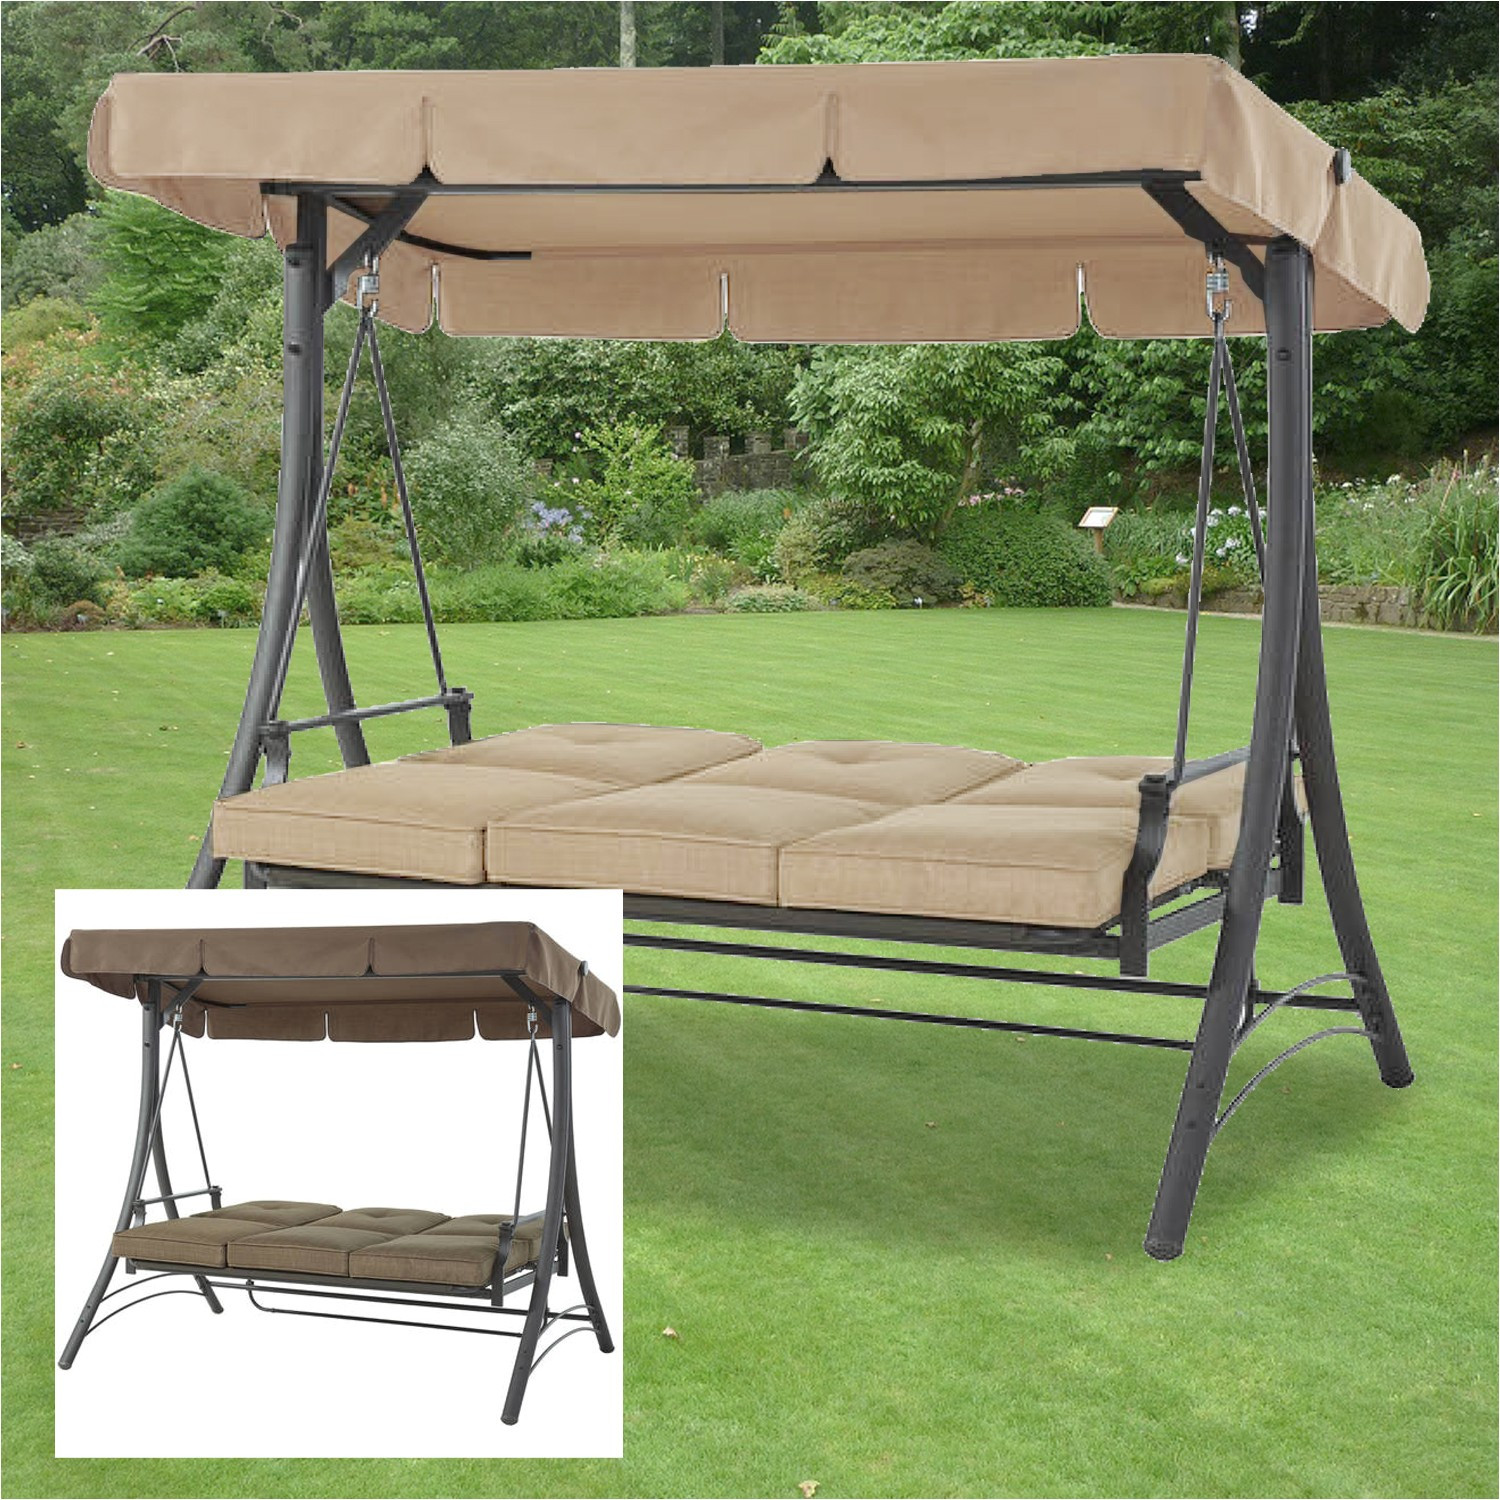 Backyard Creations Awning
 Backyard Creations Replacement Canopy for Swing